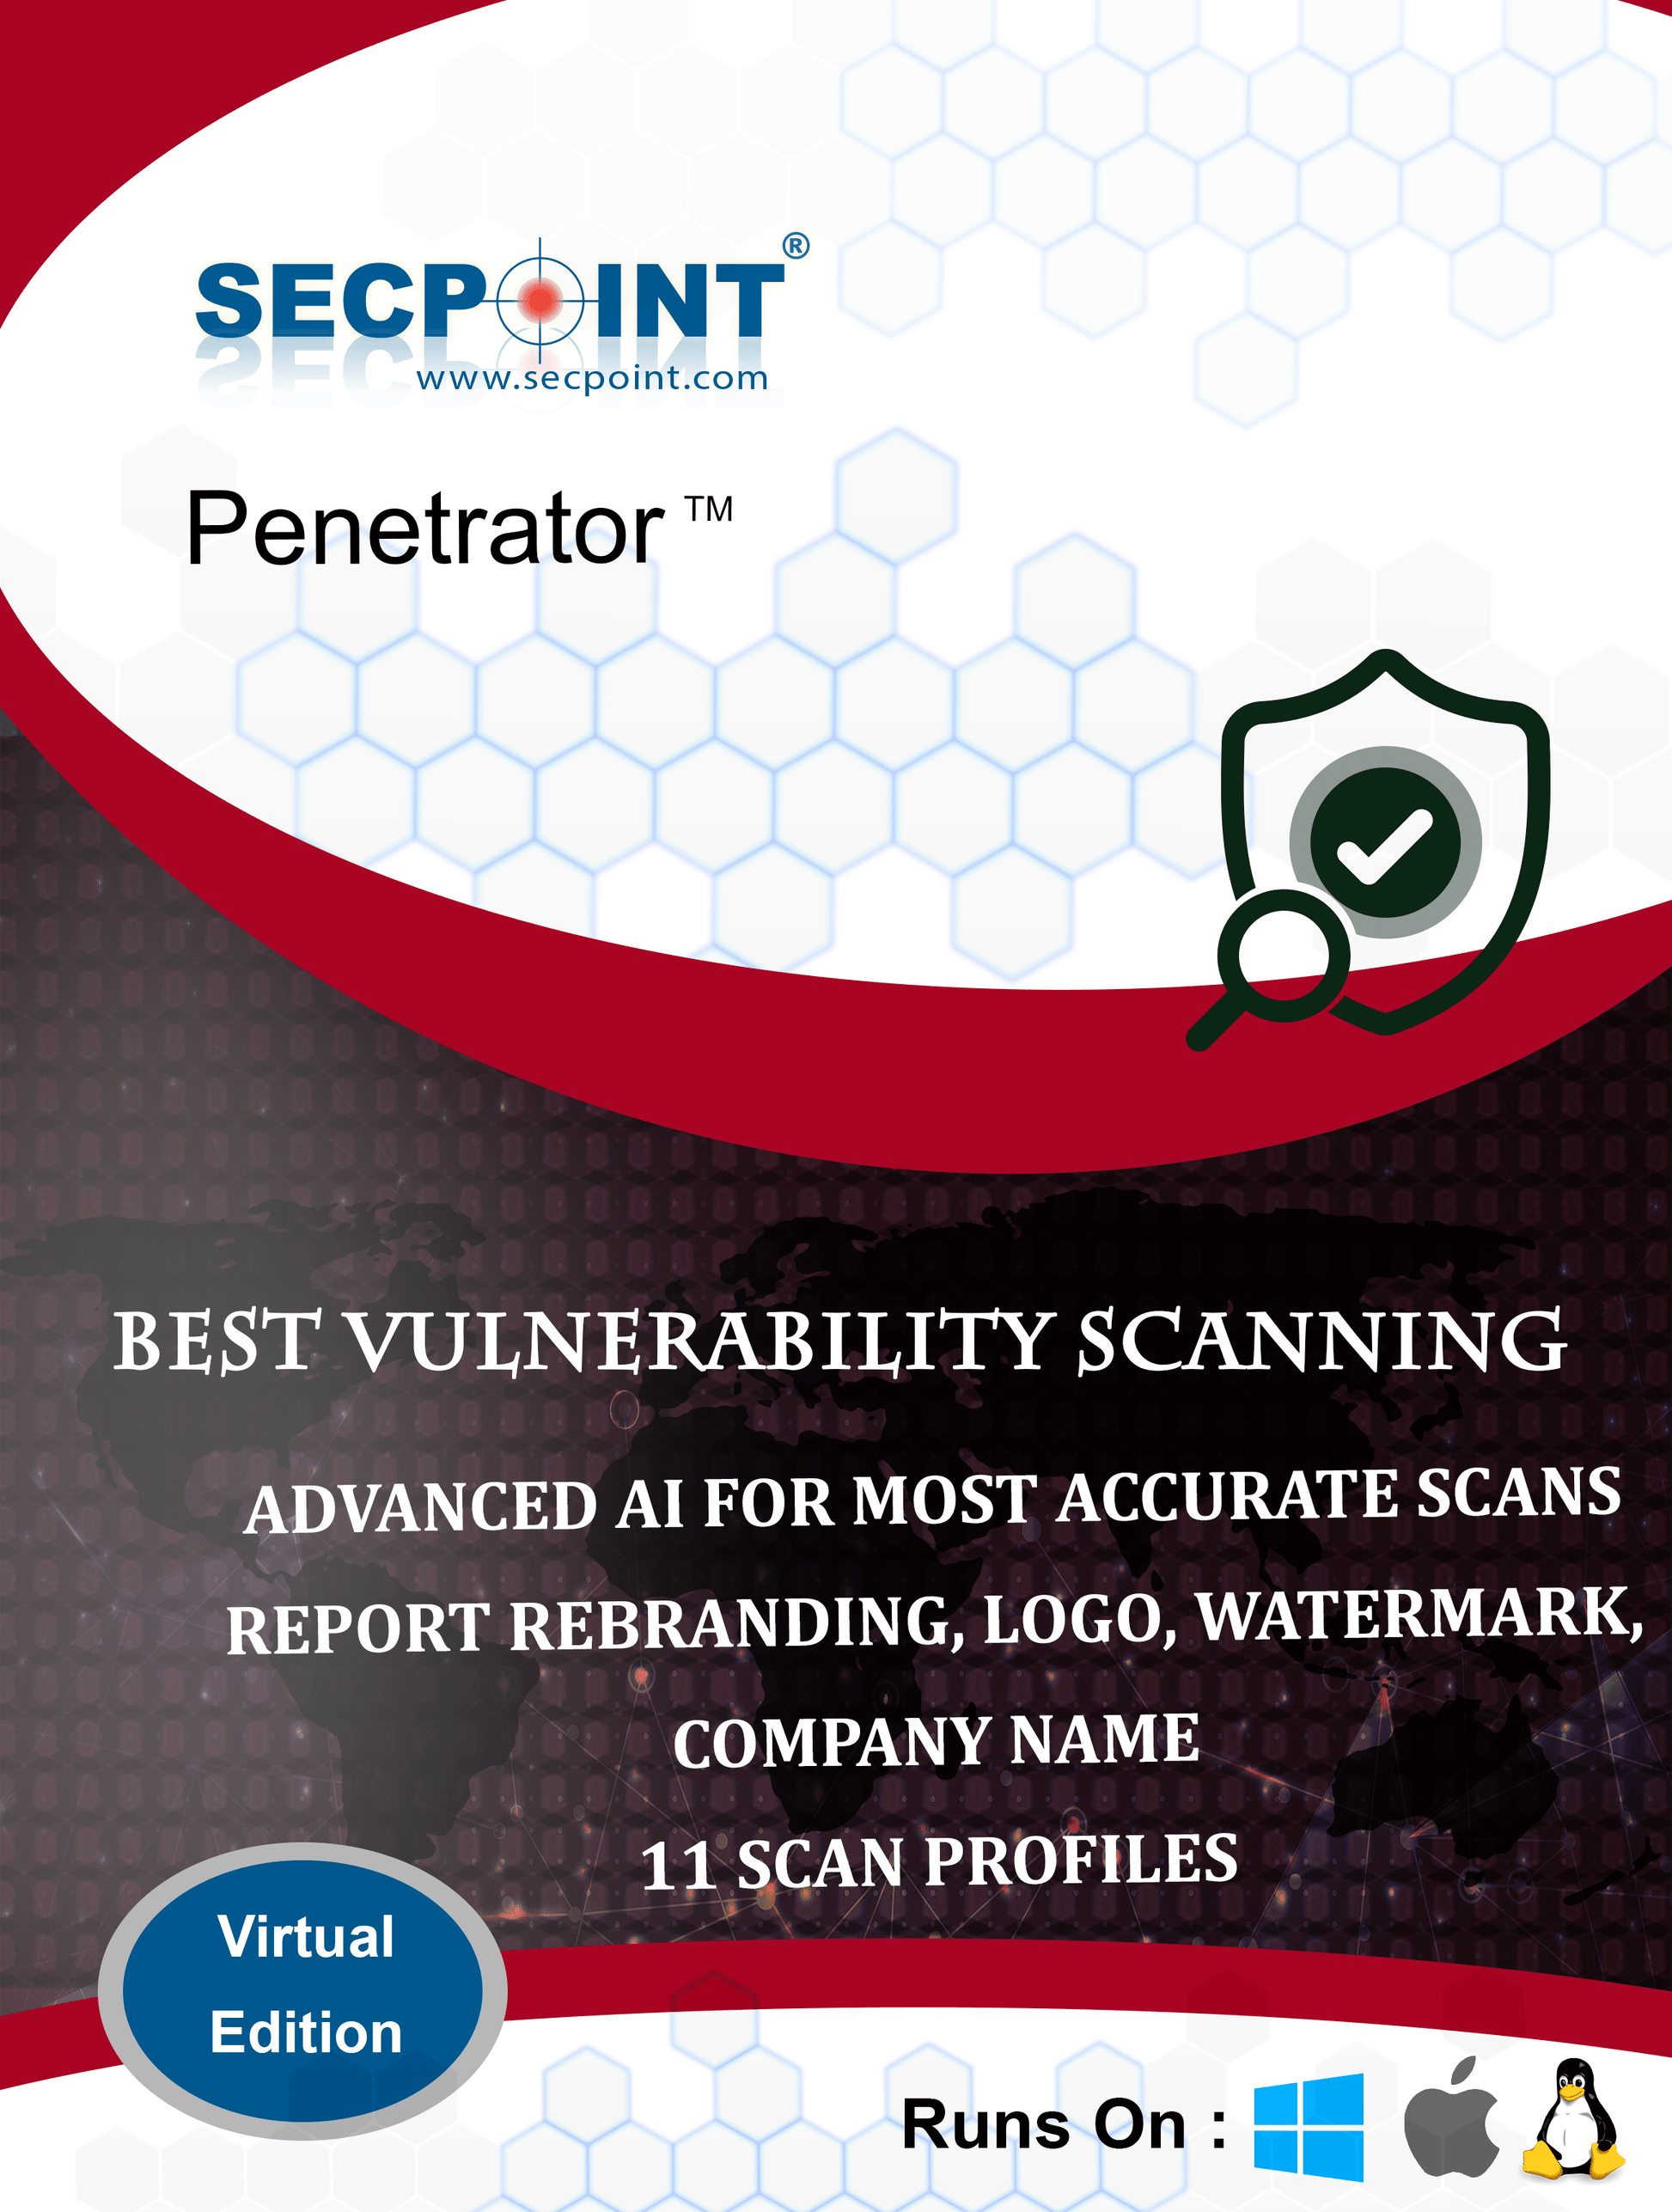 SecPoint Penetrator S9 - 2048 IP Concurrent Scan License Vulnerability Assessment  (3 Years License) - SecPoint